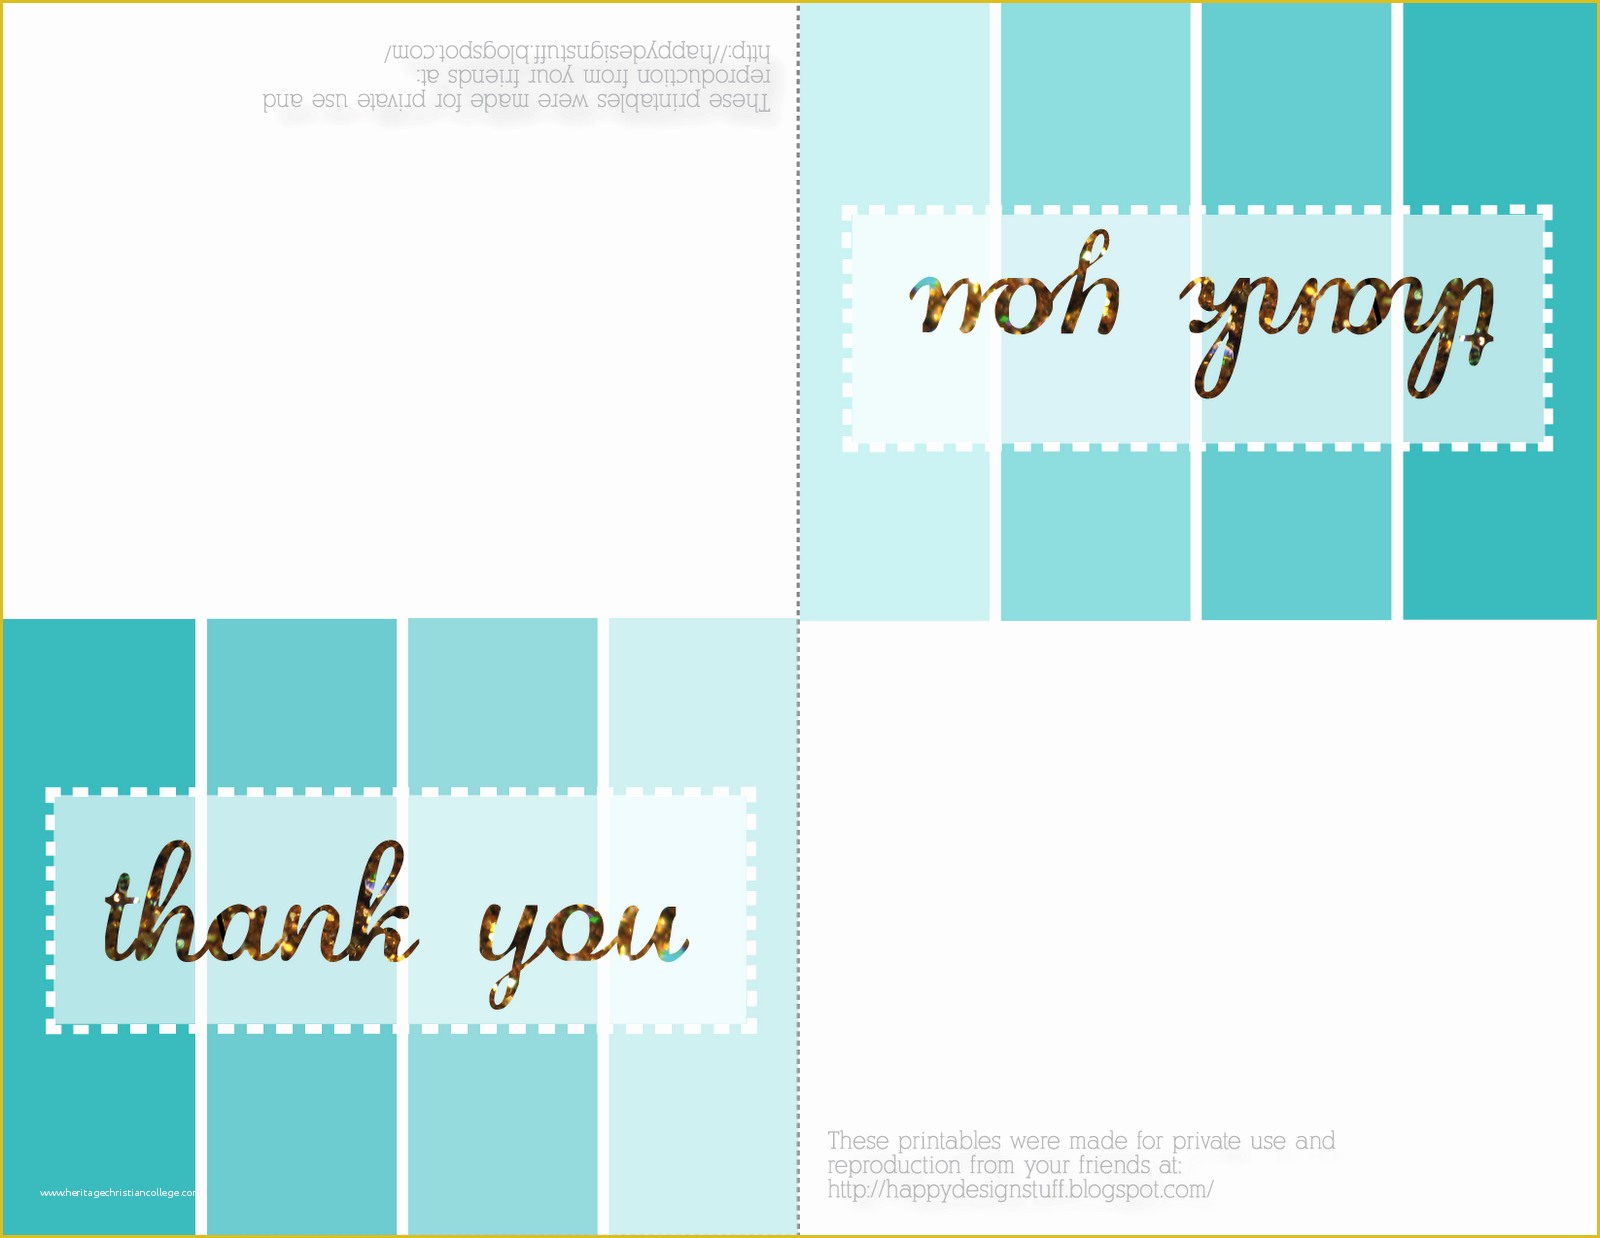 Free Thank You Card Template Of Happy Design Stuff Free Printable Friday Thank You Cards